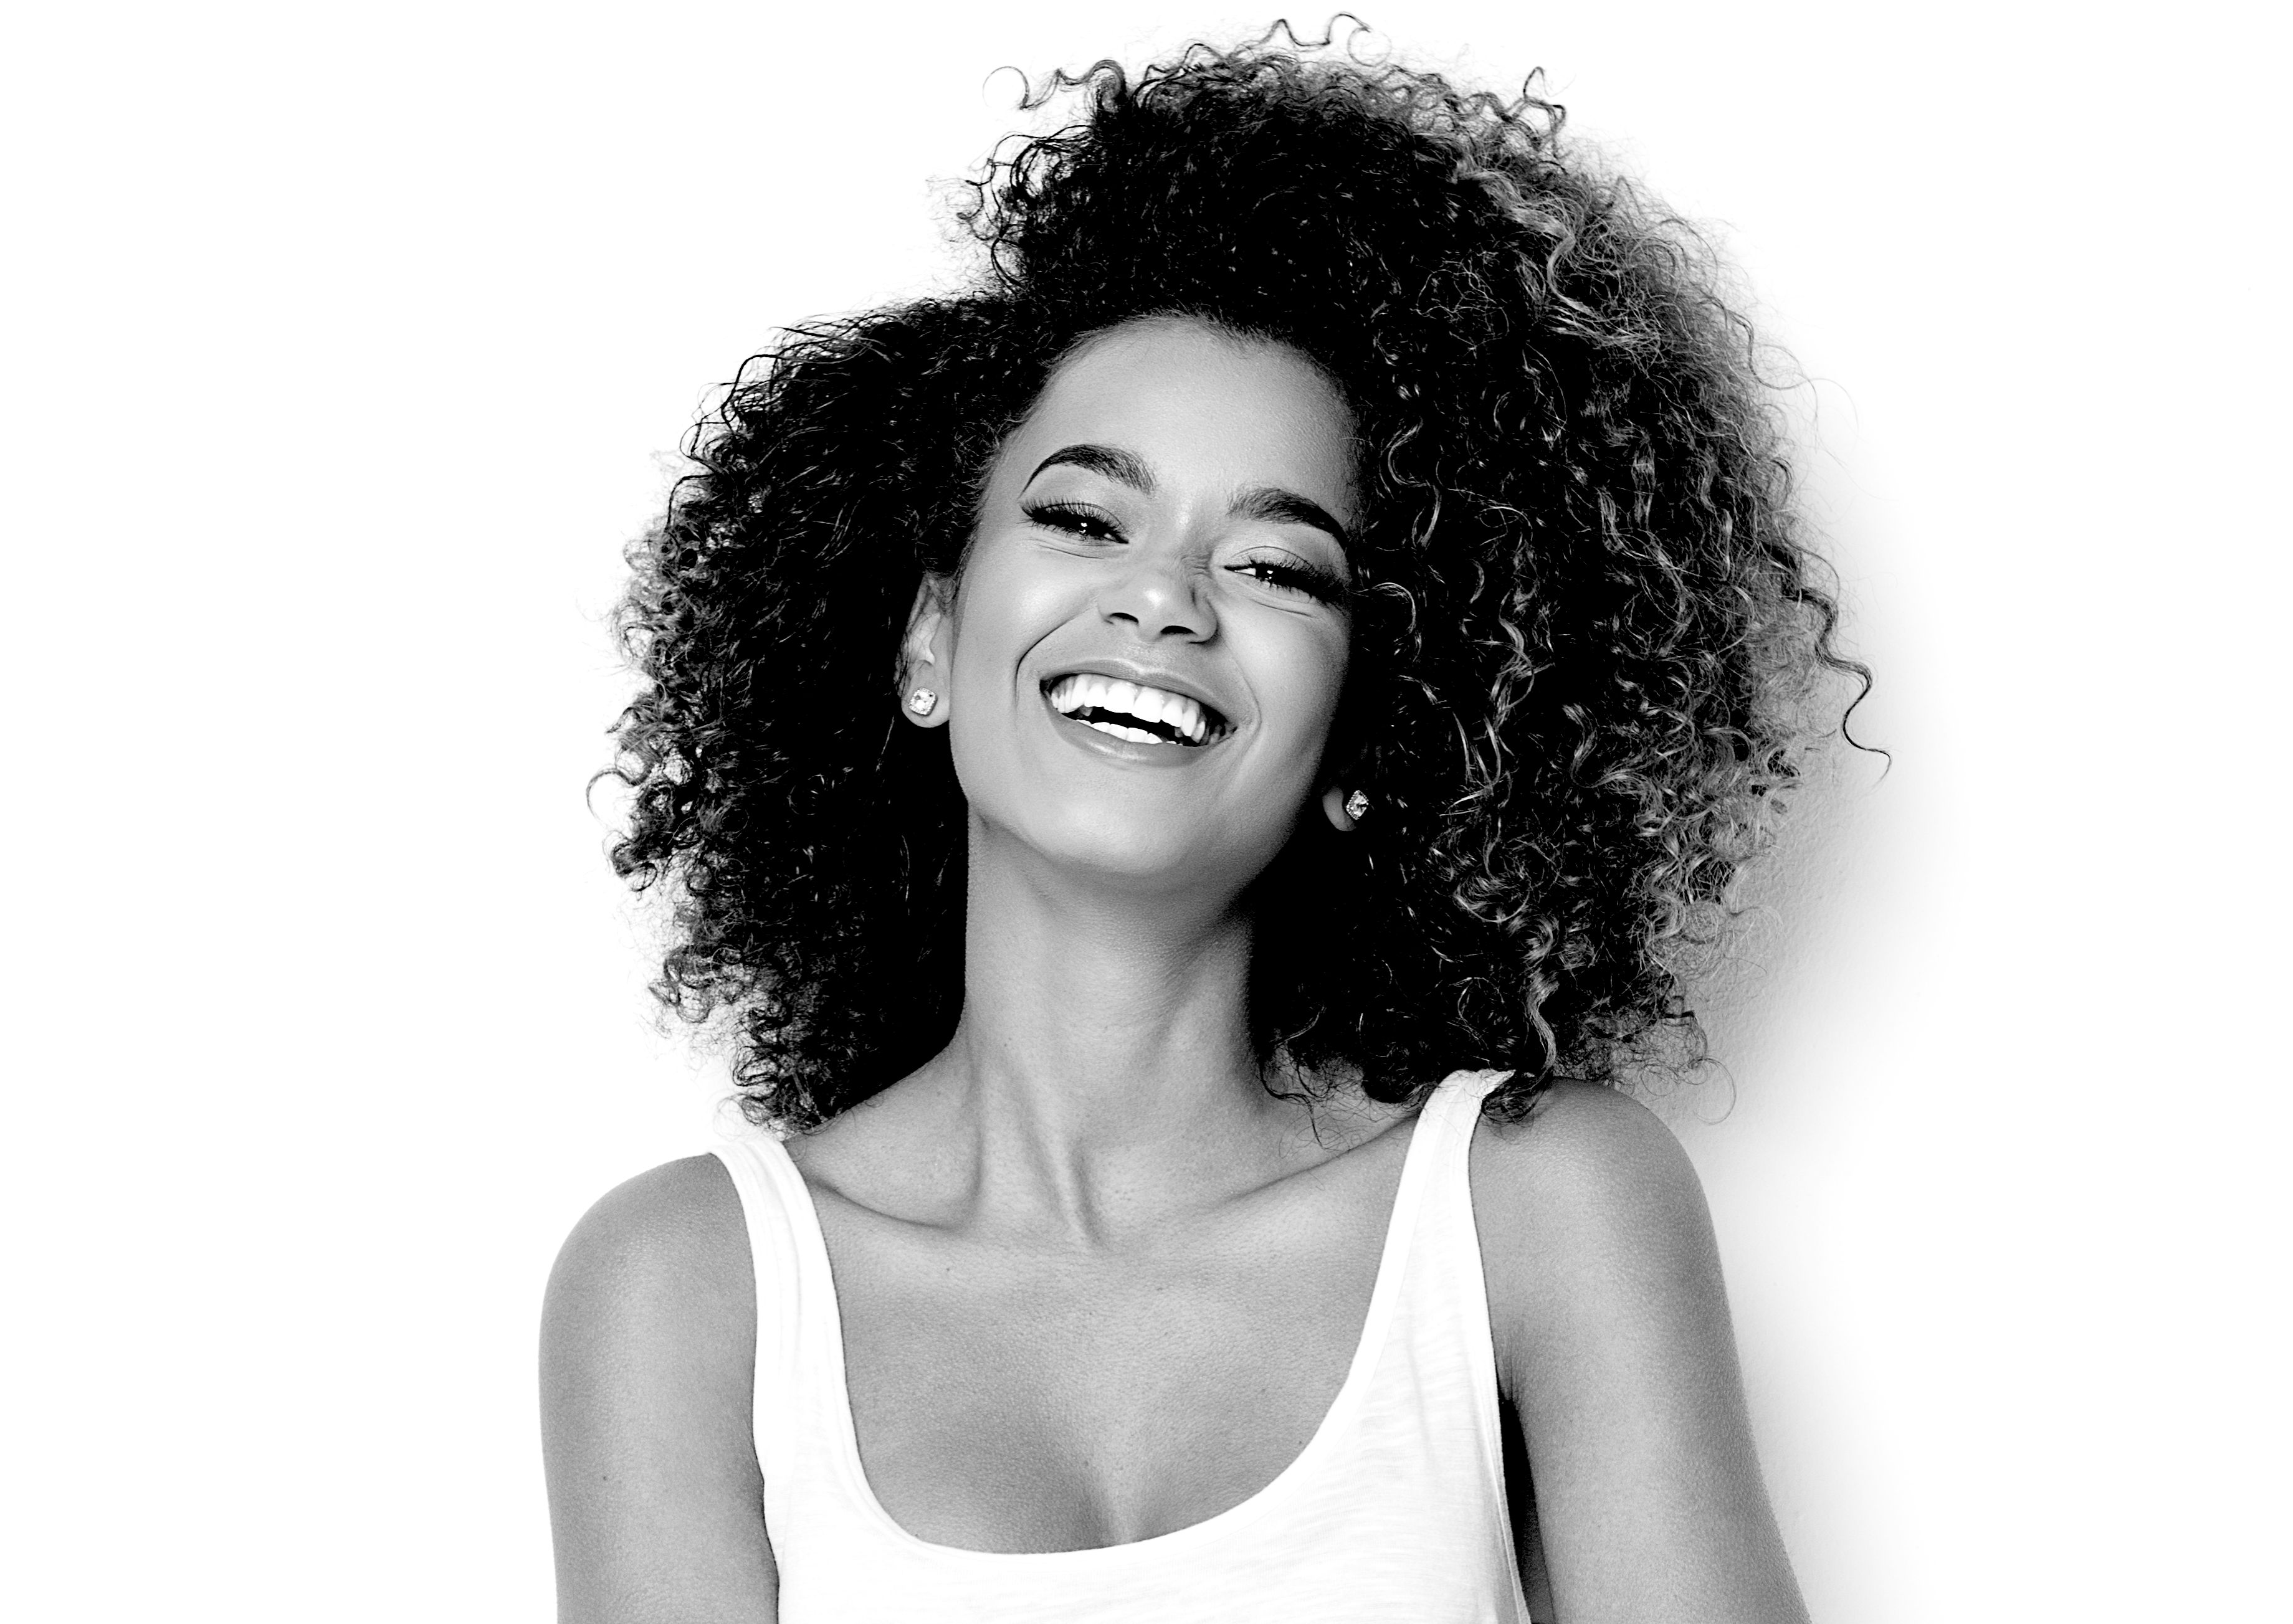 A smiling picture of the young lady with curly hair